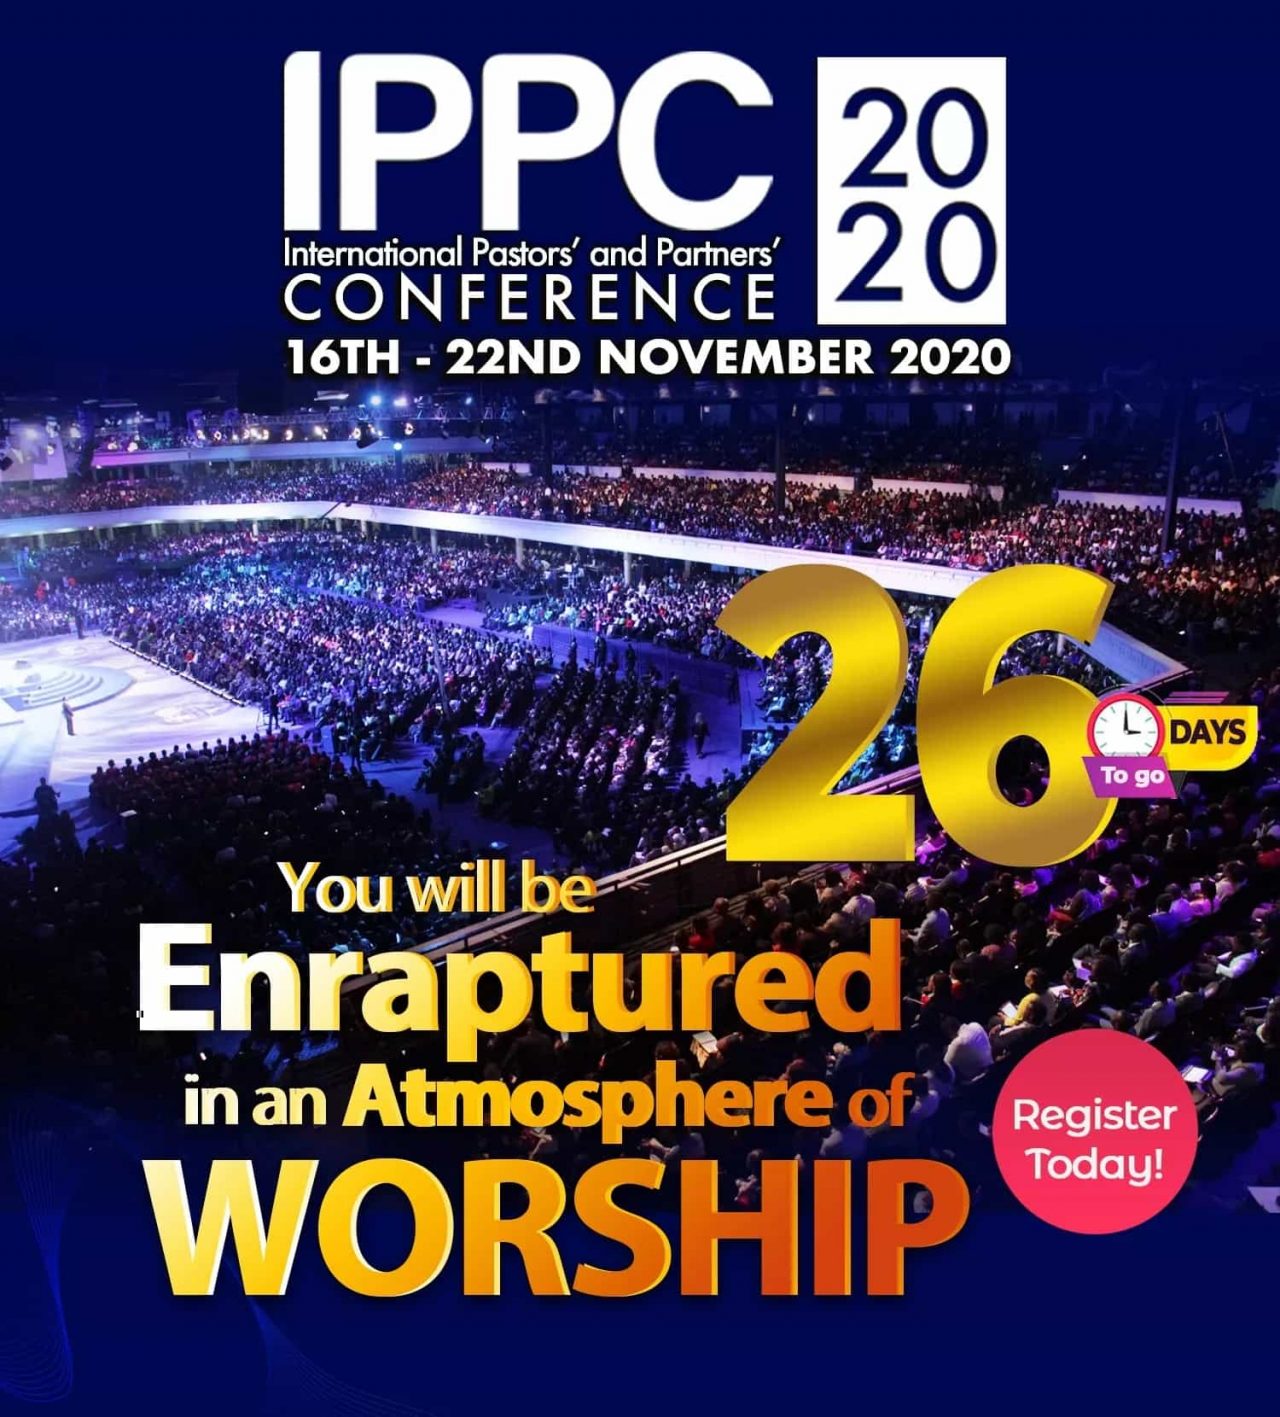 International Pastors’ And Partner’ Conference 2020 With Pastor Chris